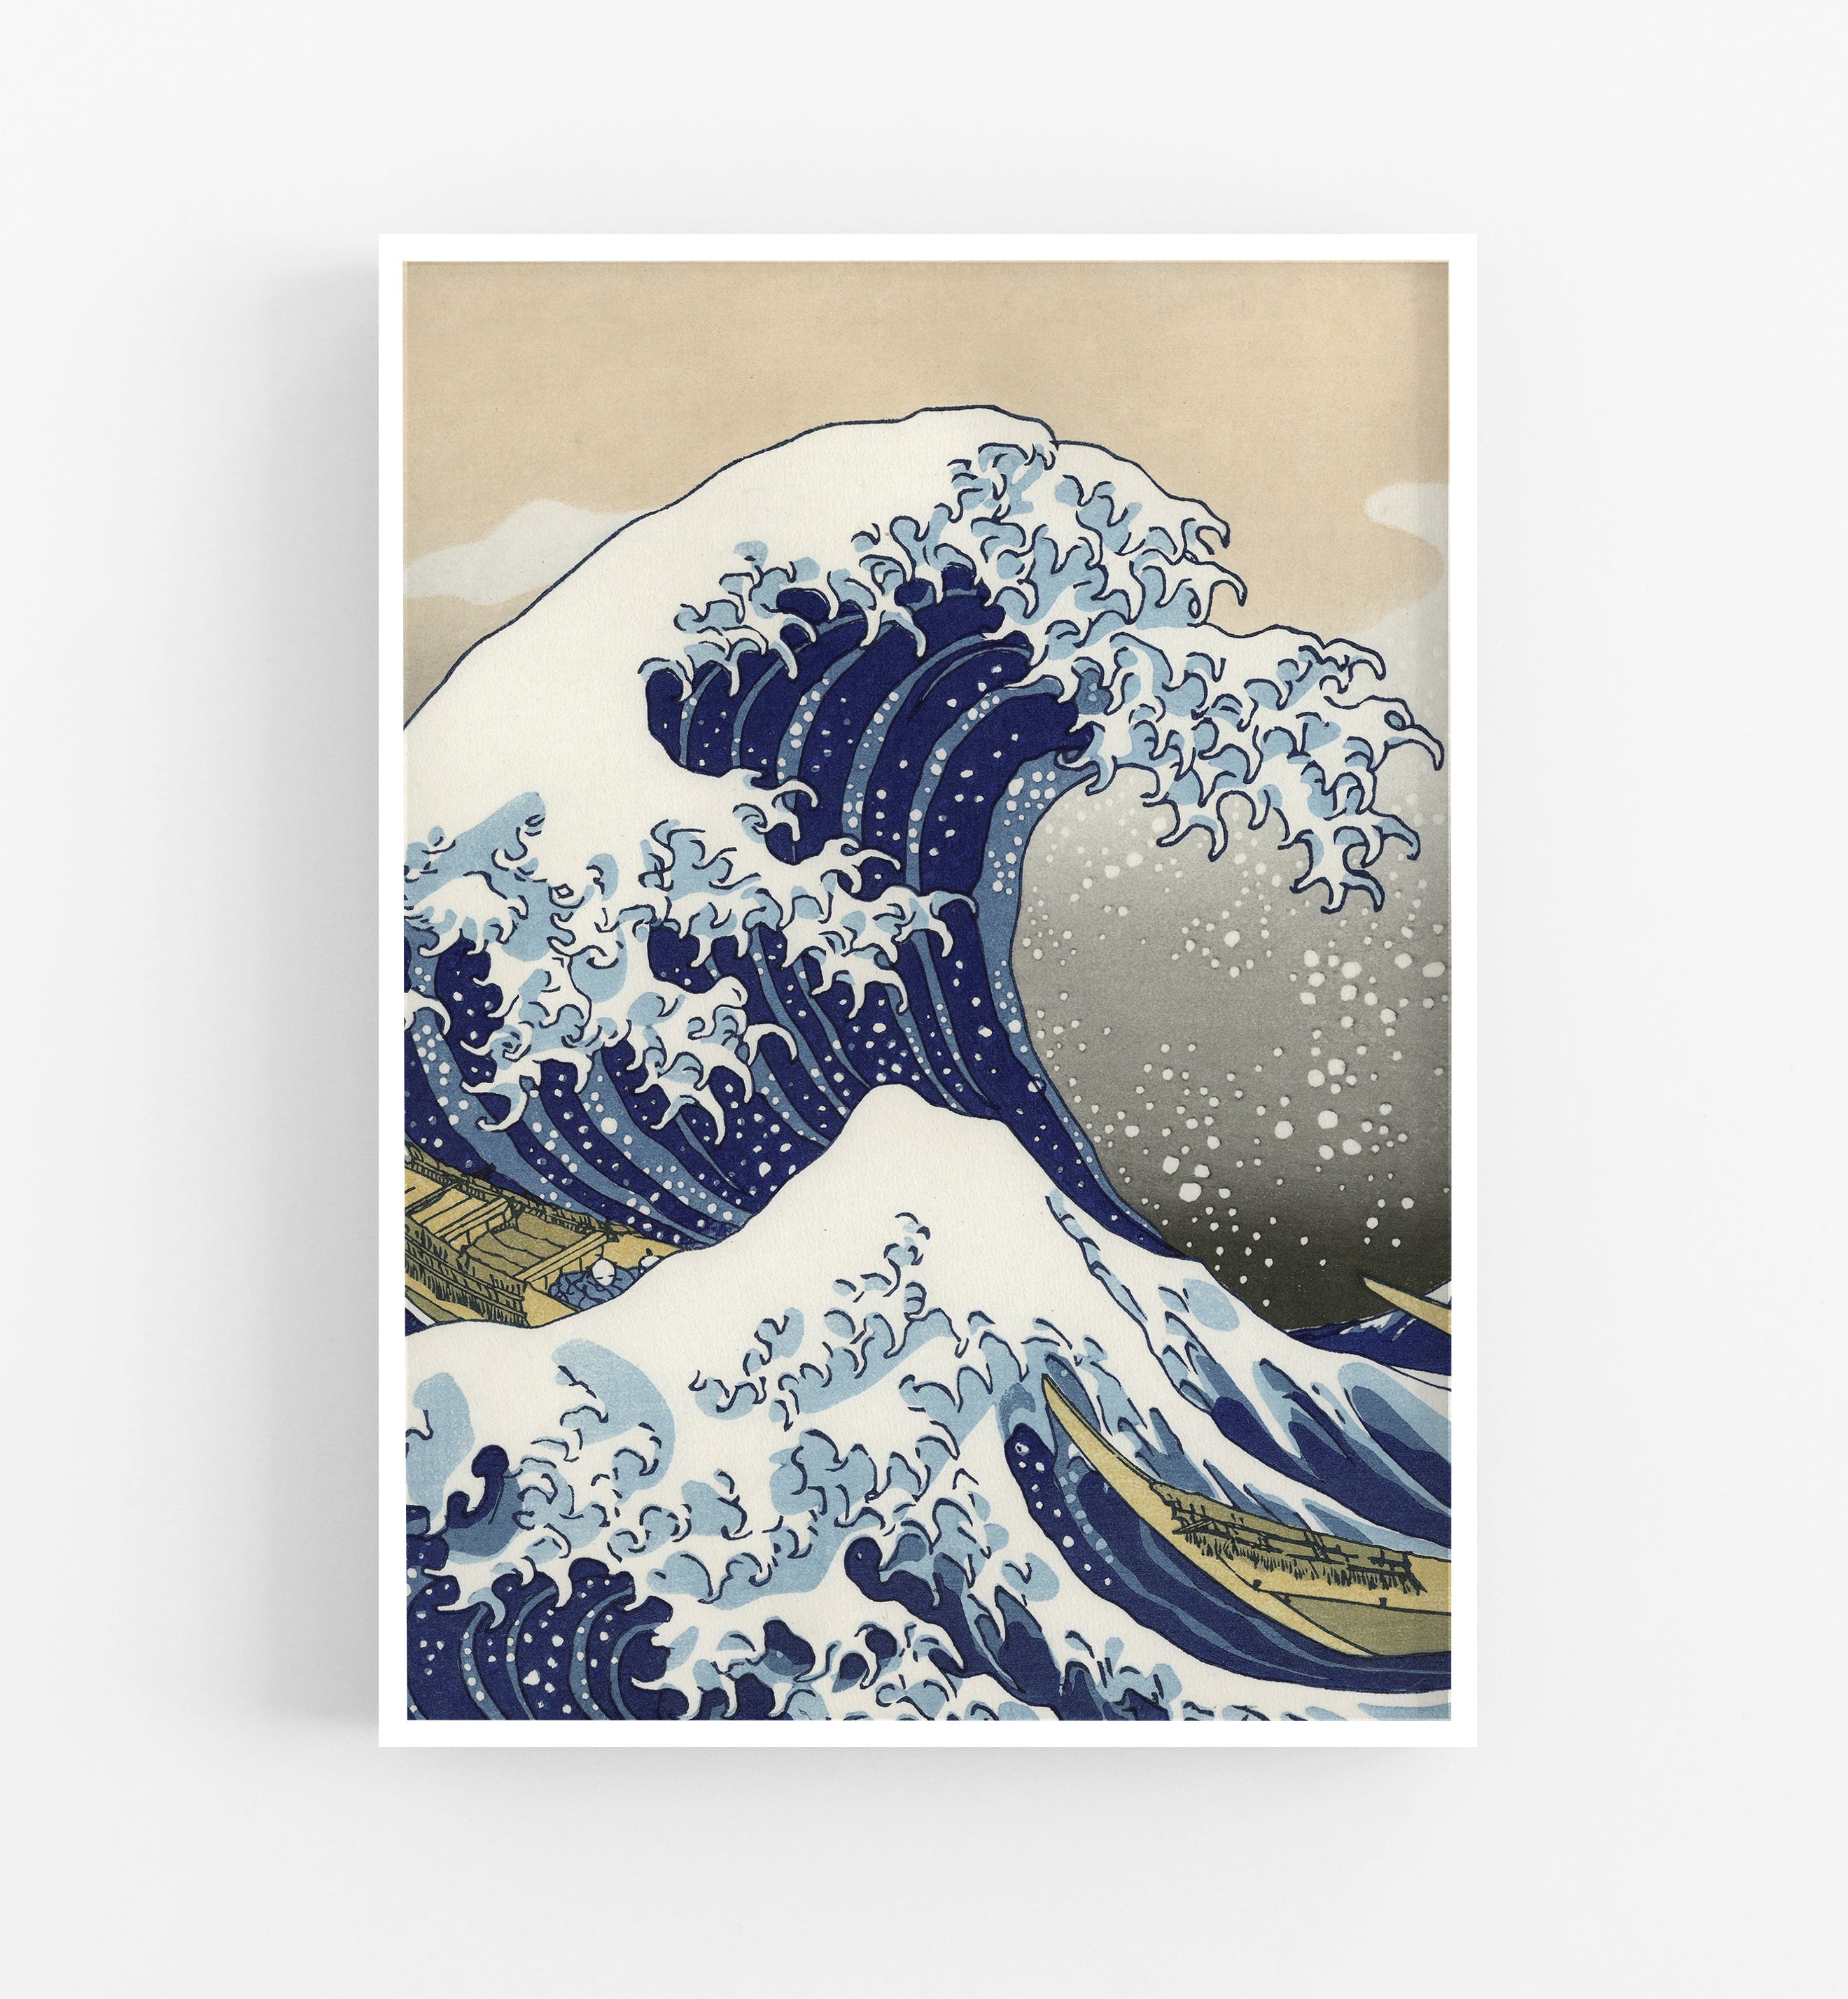 The Great Wave Cut